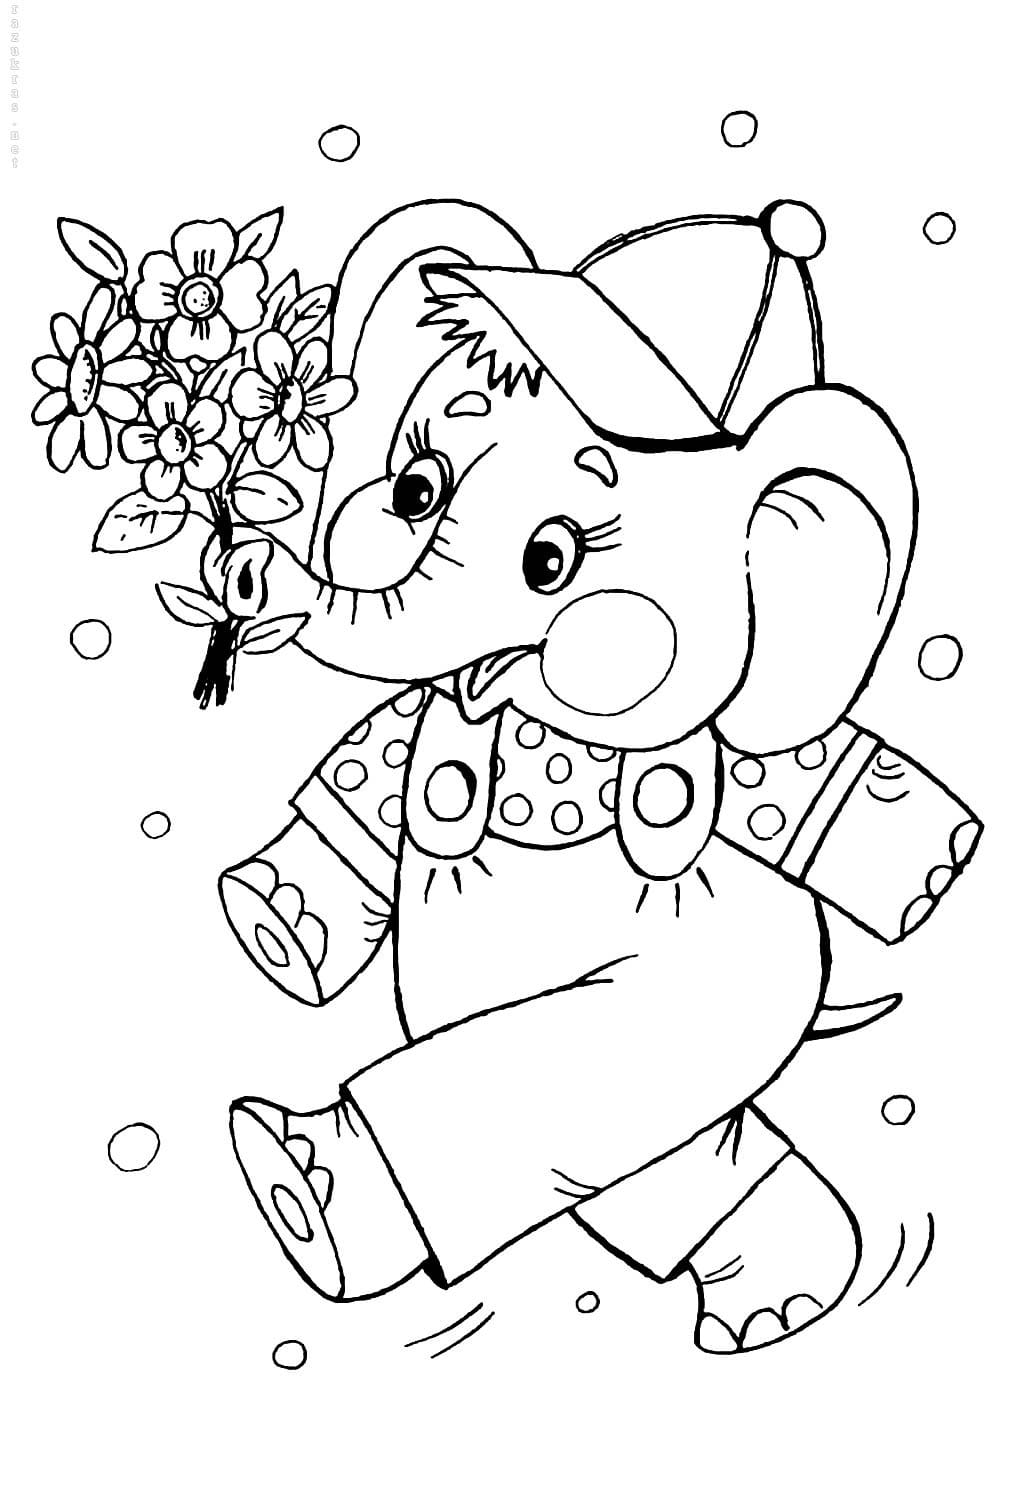 Coloring pages for kids 20 20 years. Download or print online